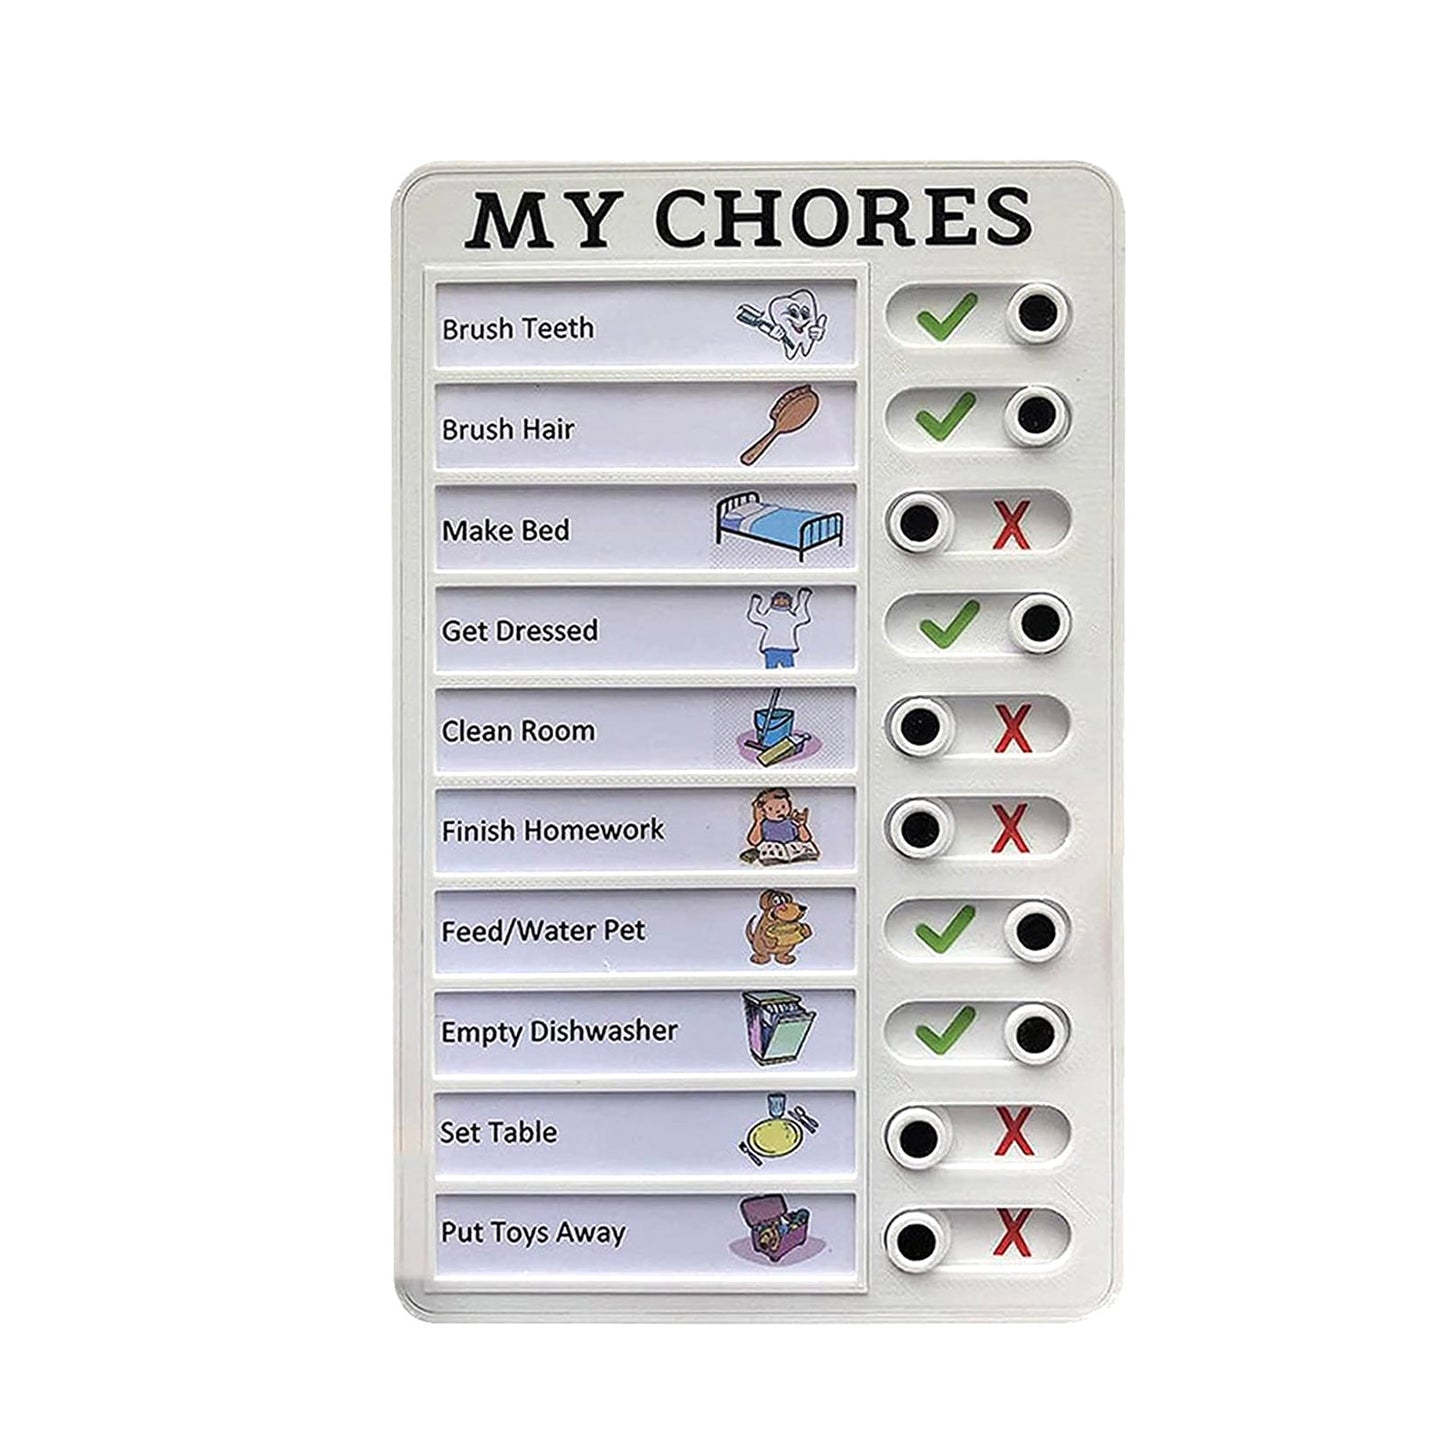 Chores Portable Memo Board Daily Schedule For Kids